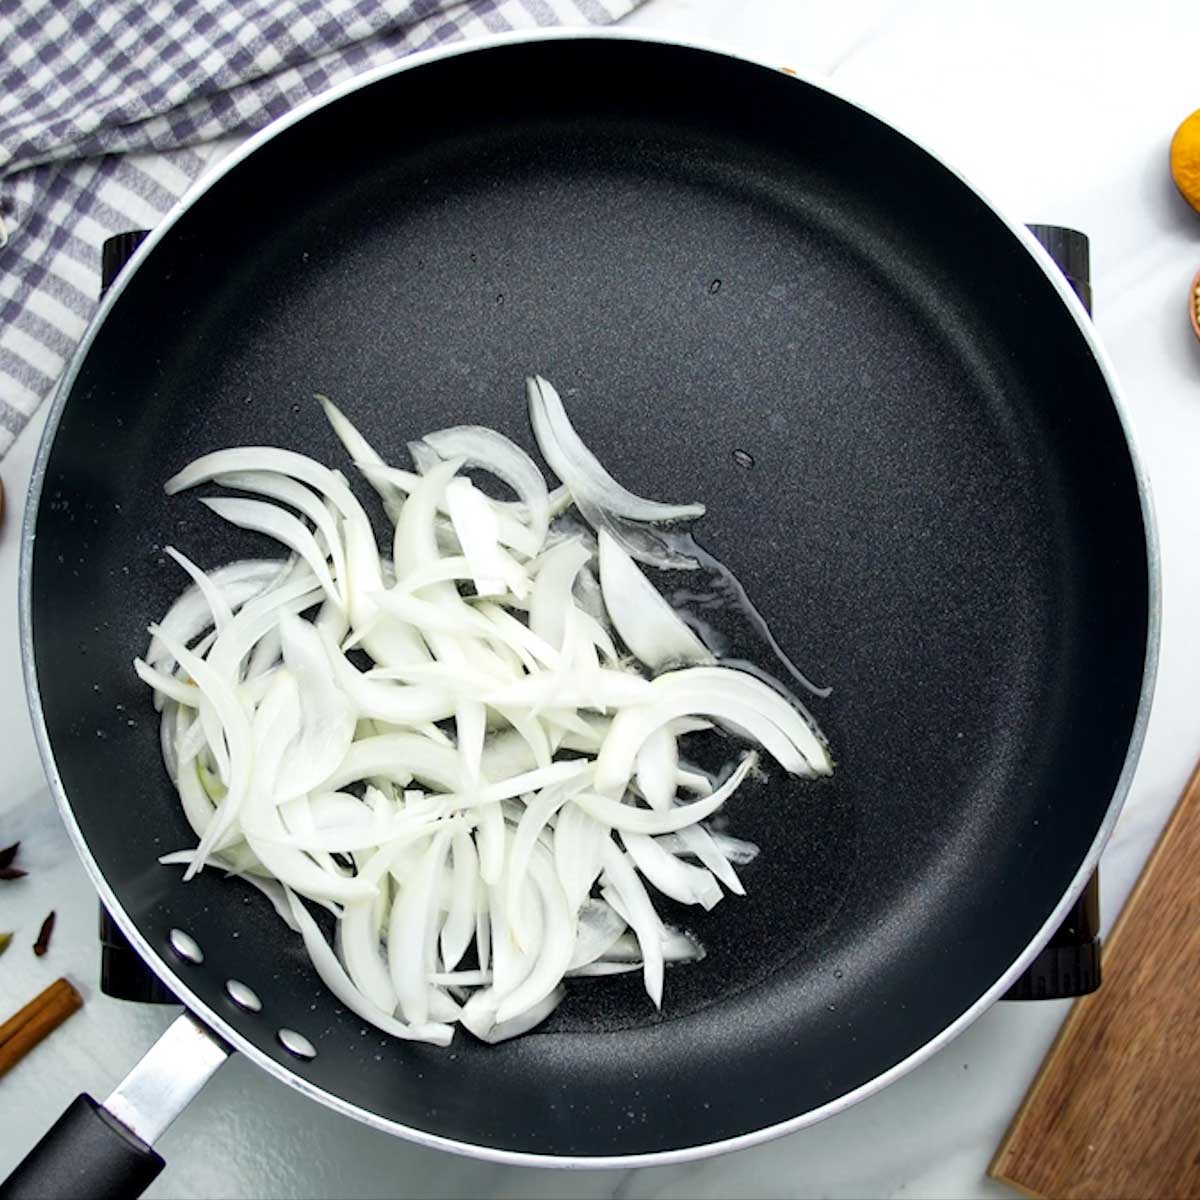 Sliced onions being fried in a pan until golden brown.